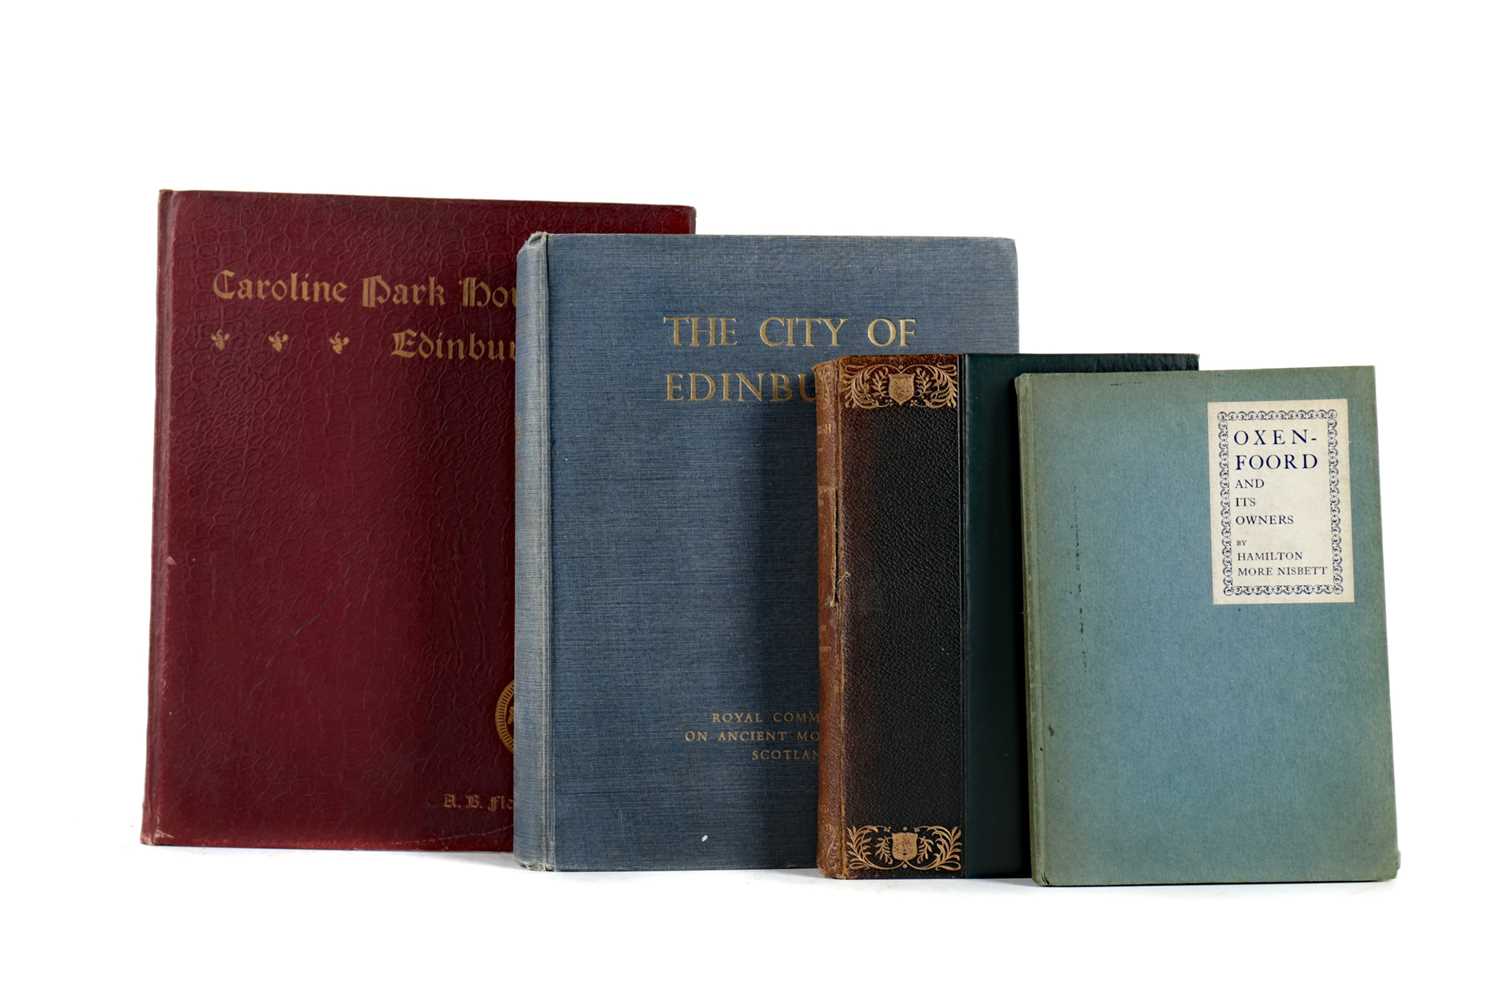 Lot 1094 - THE ROYAL COMMISSION ON THE ANCIENT MONUMENTS OF SCOTLAND AND THREE OTHER BOOKS